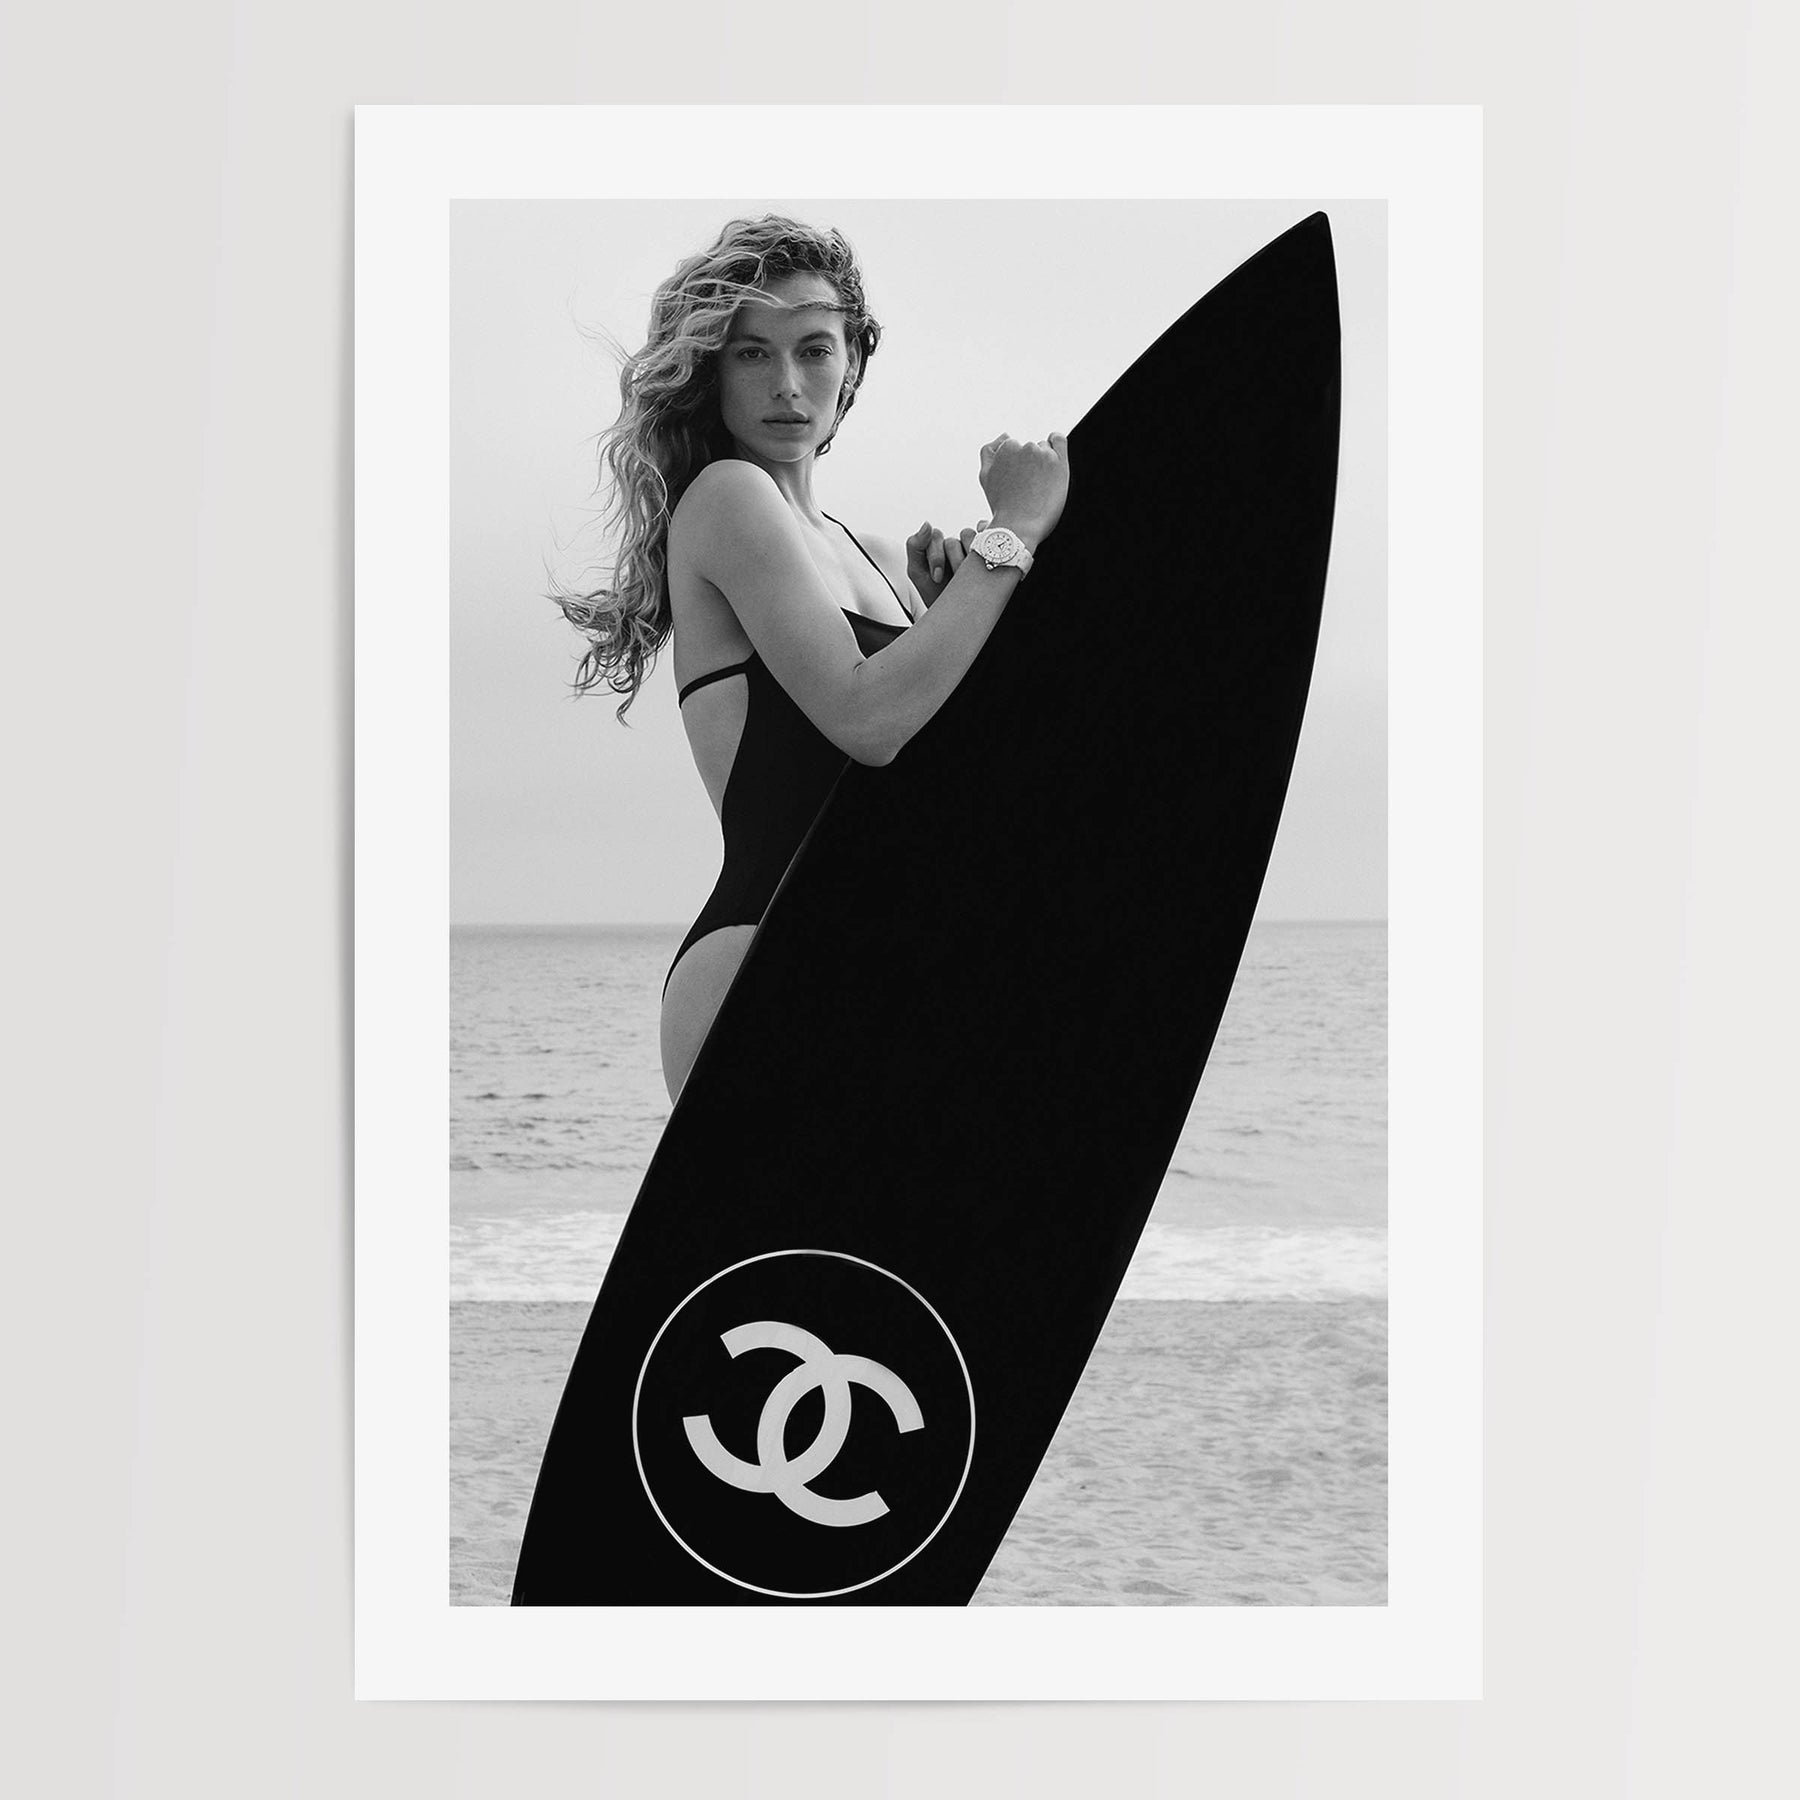 Set of 2 Surfer Girls Black and White Fashion Editorial 